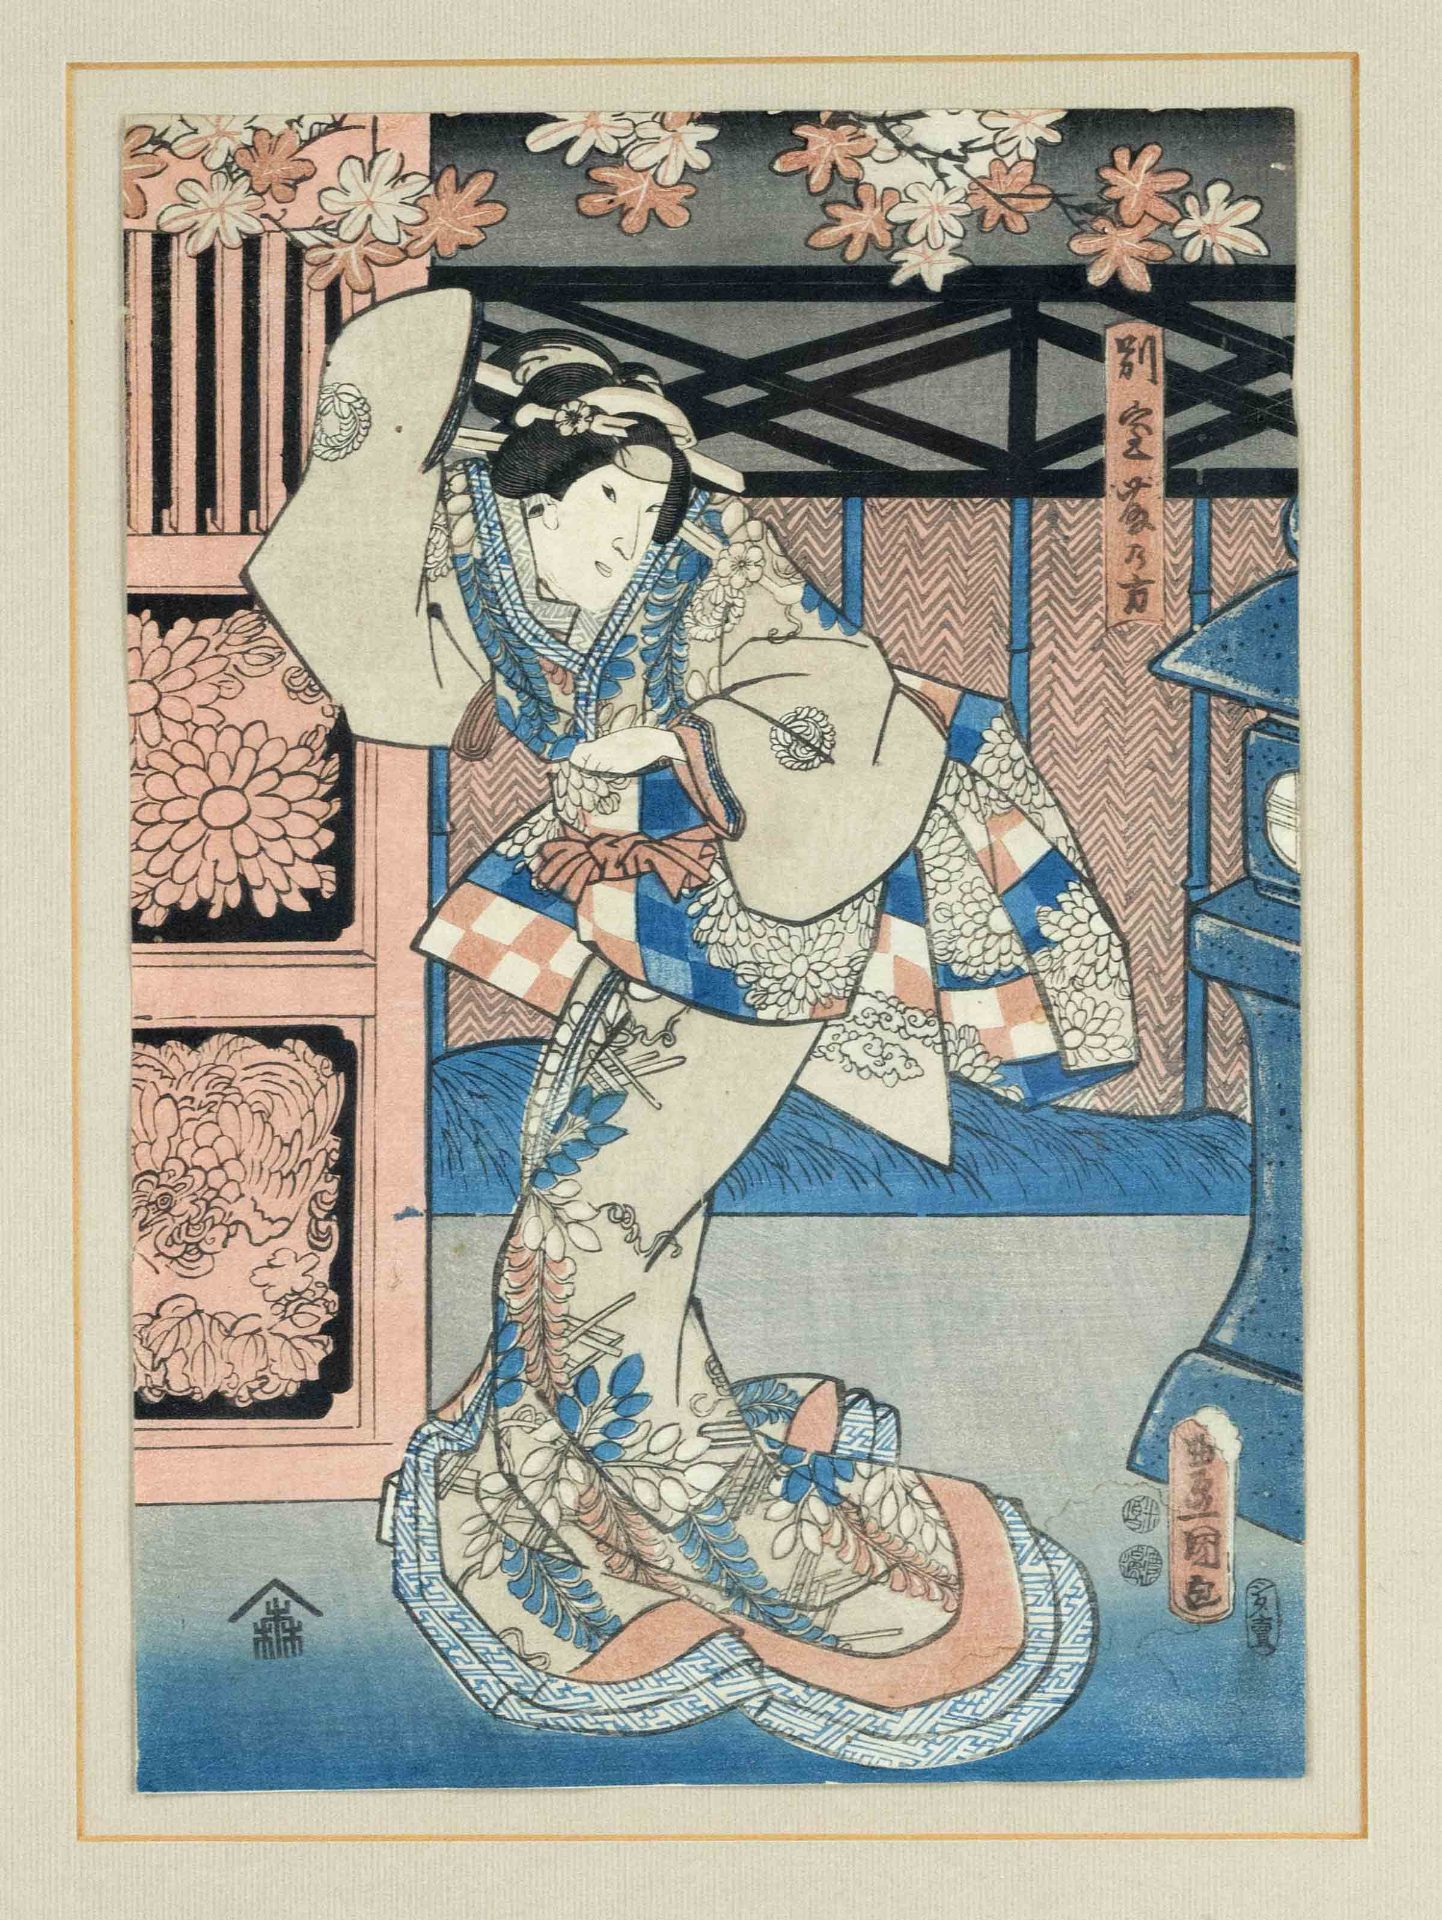 2 woodblock prints, Japan 19th century (Edo/Meiji). Both with depictions of geishas. Oban formats - Image 2 of 2